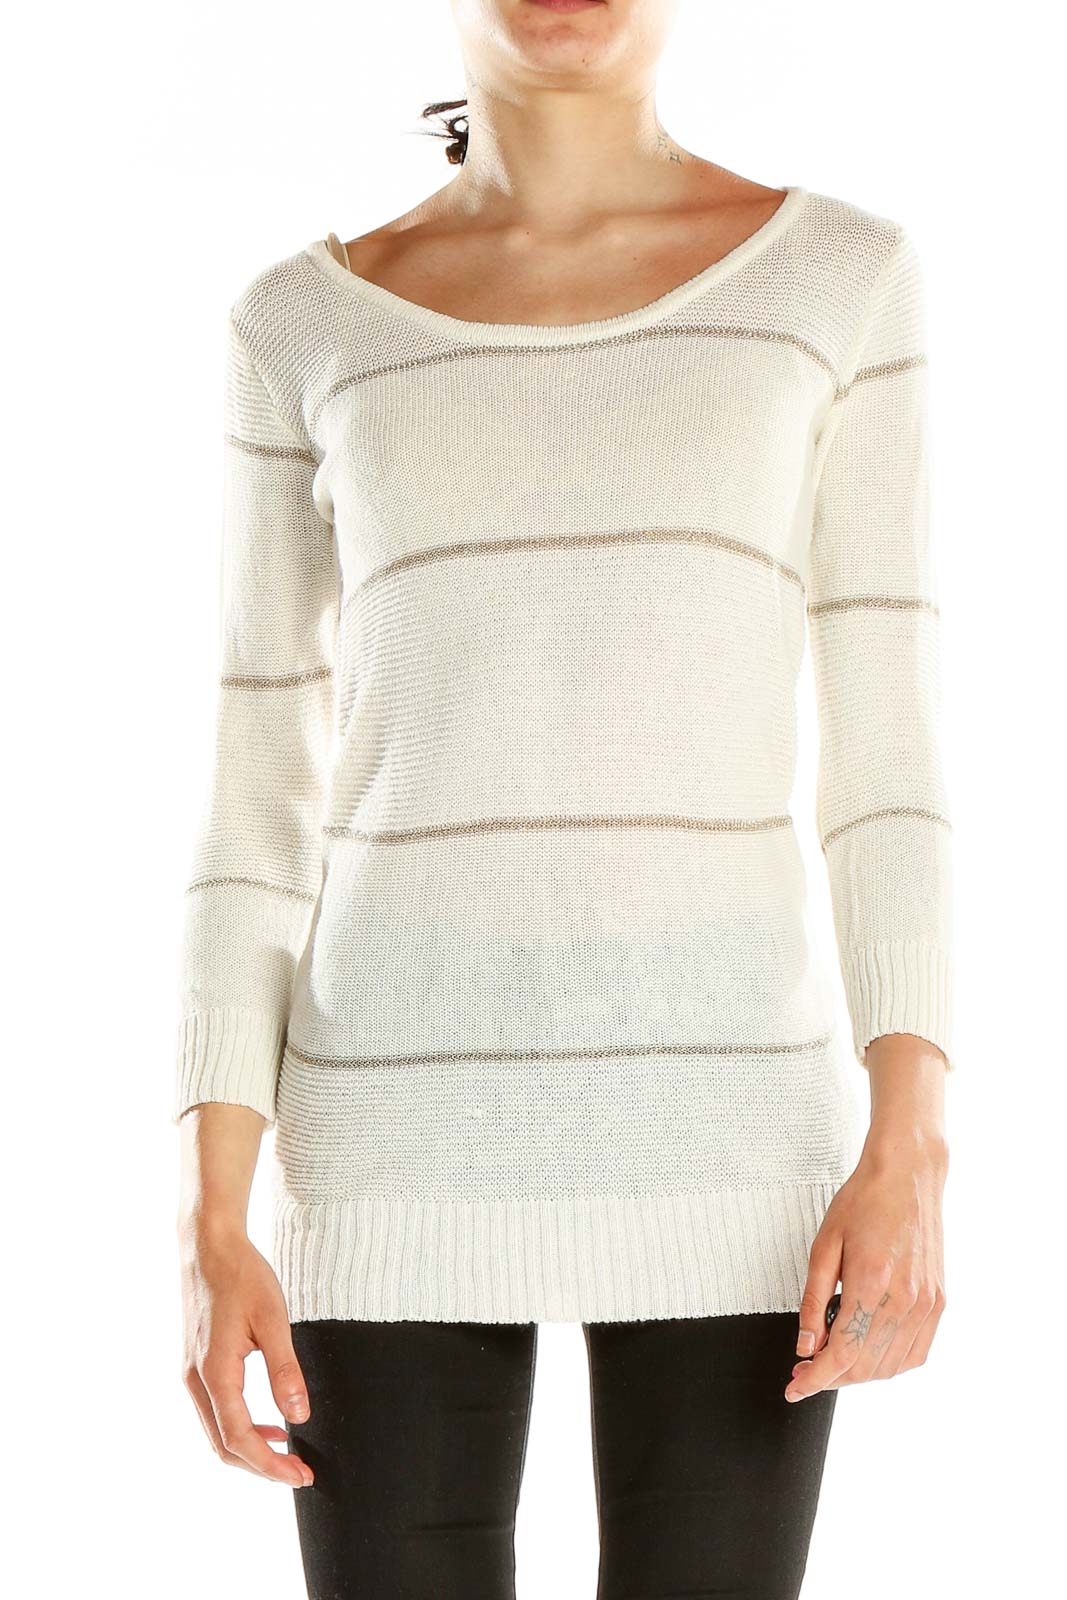 White Striped Casual Light Sweater Front